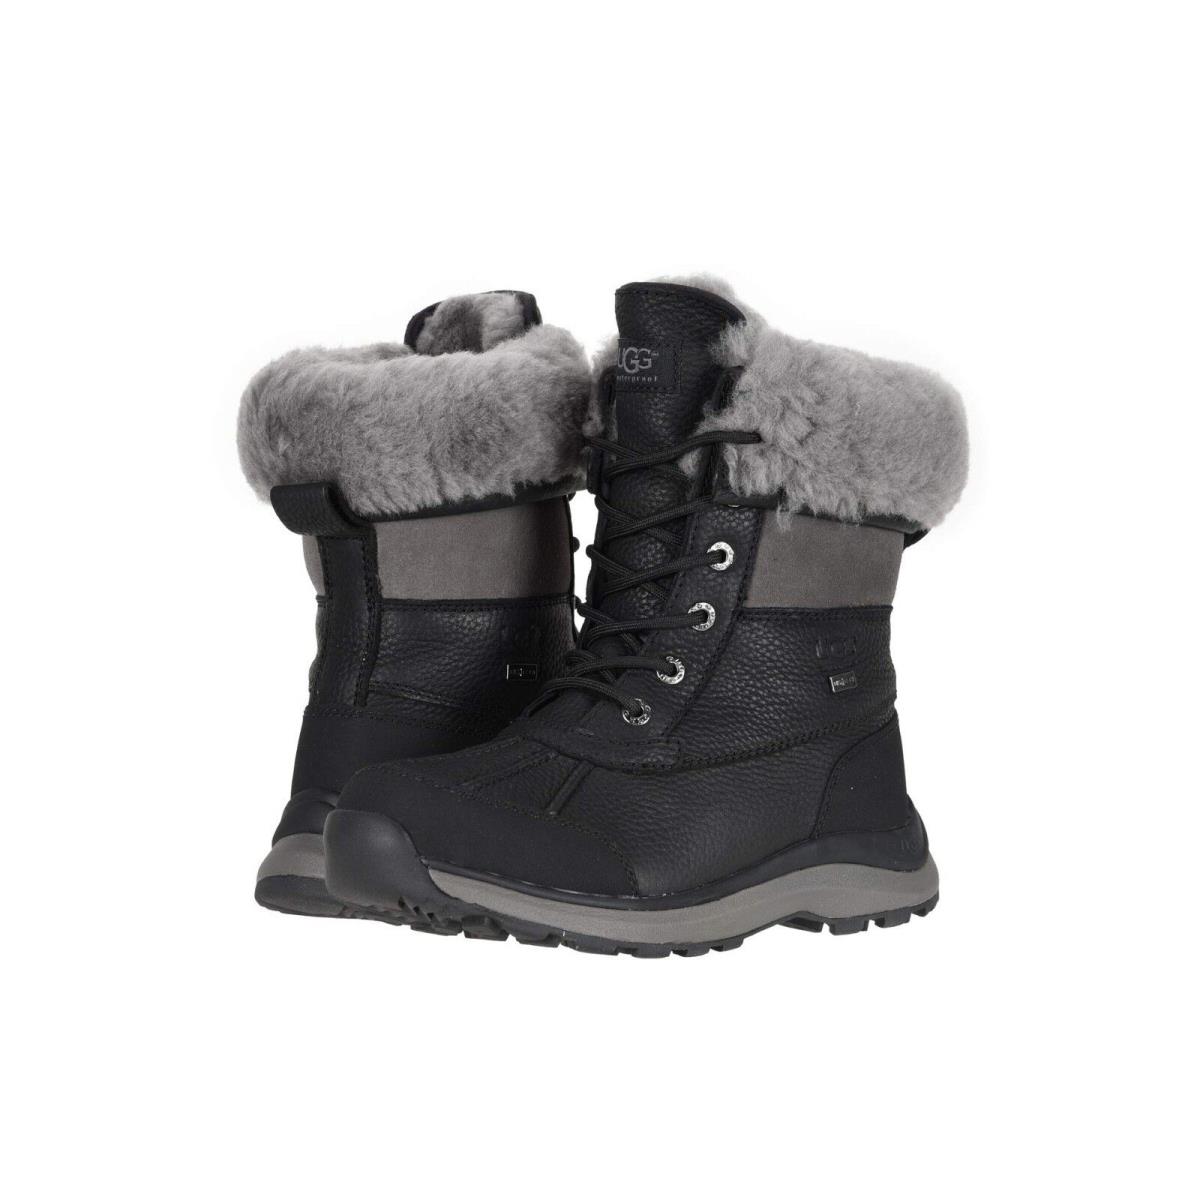 Women`s Shoes Ugg Adirondack Iii Leather/suede Winter Boots 1095141 Black